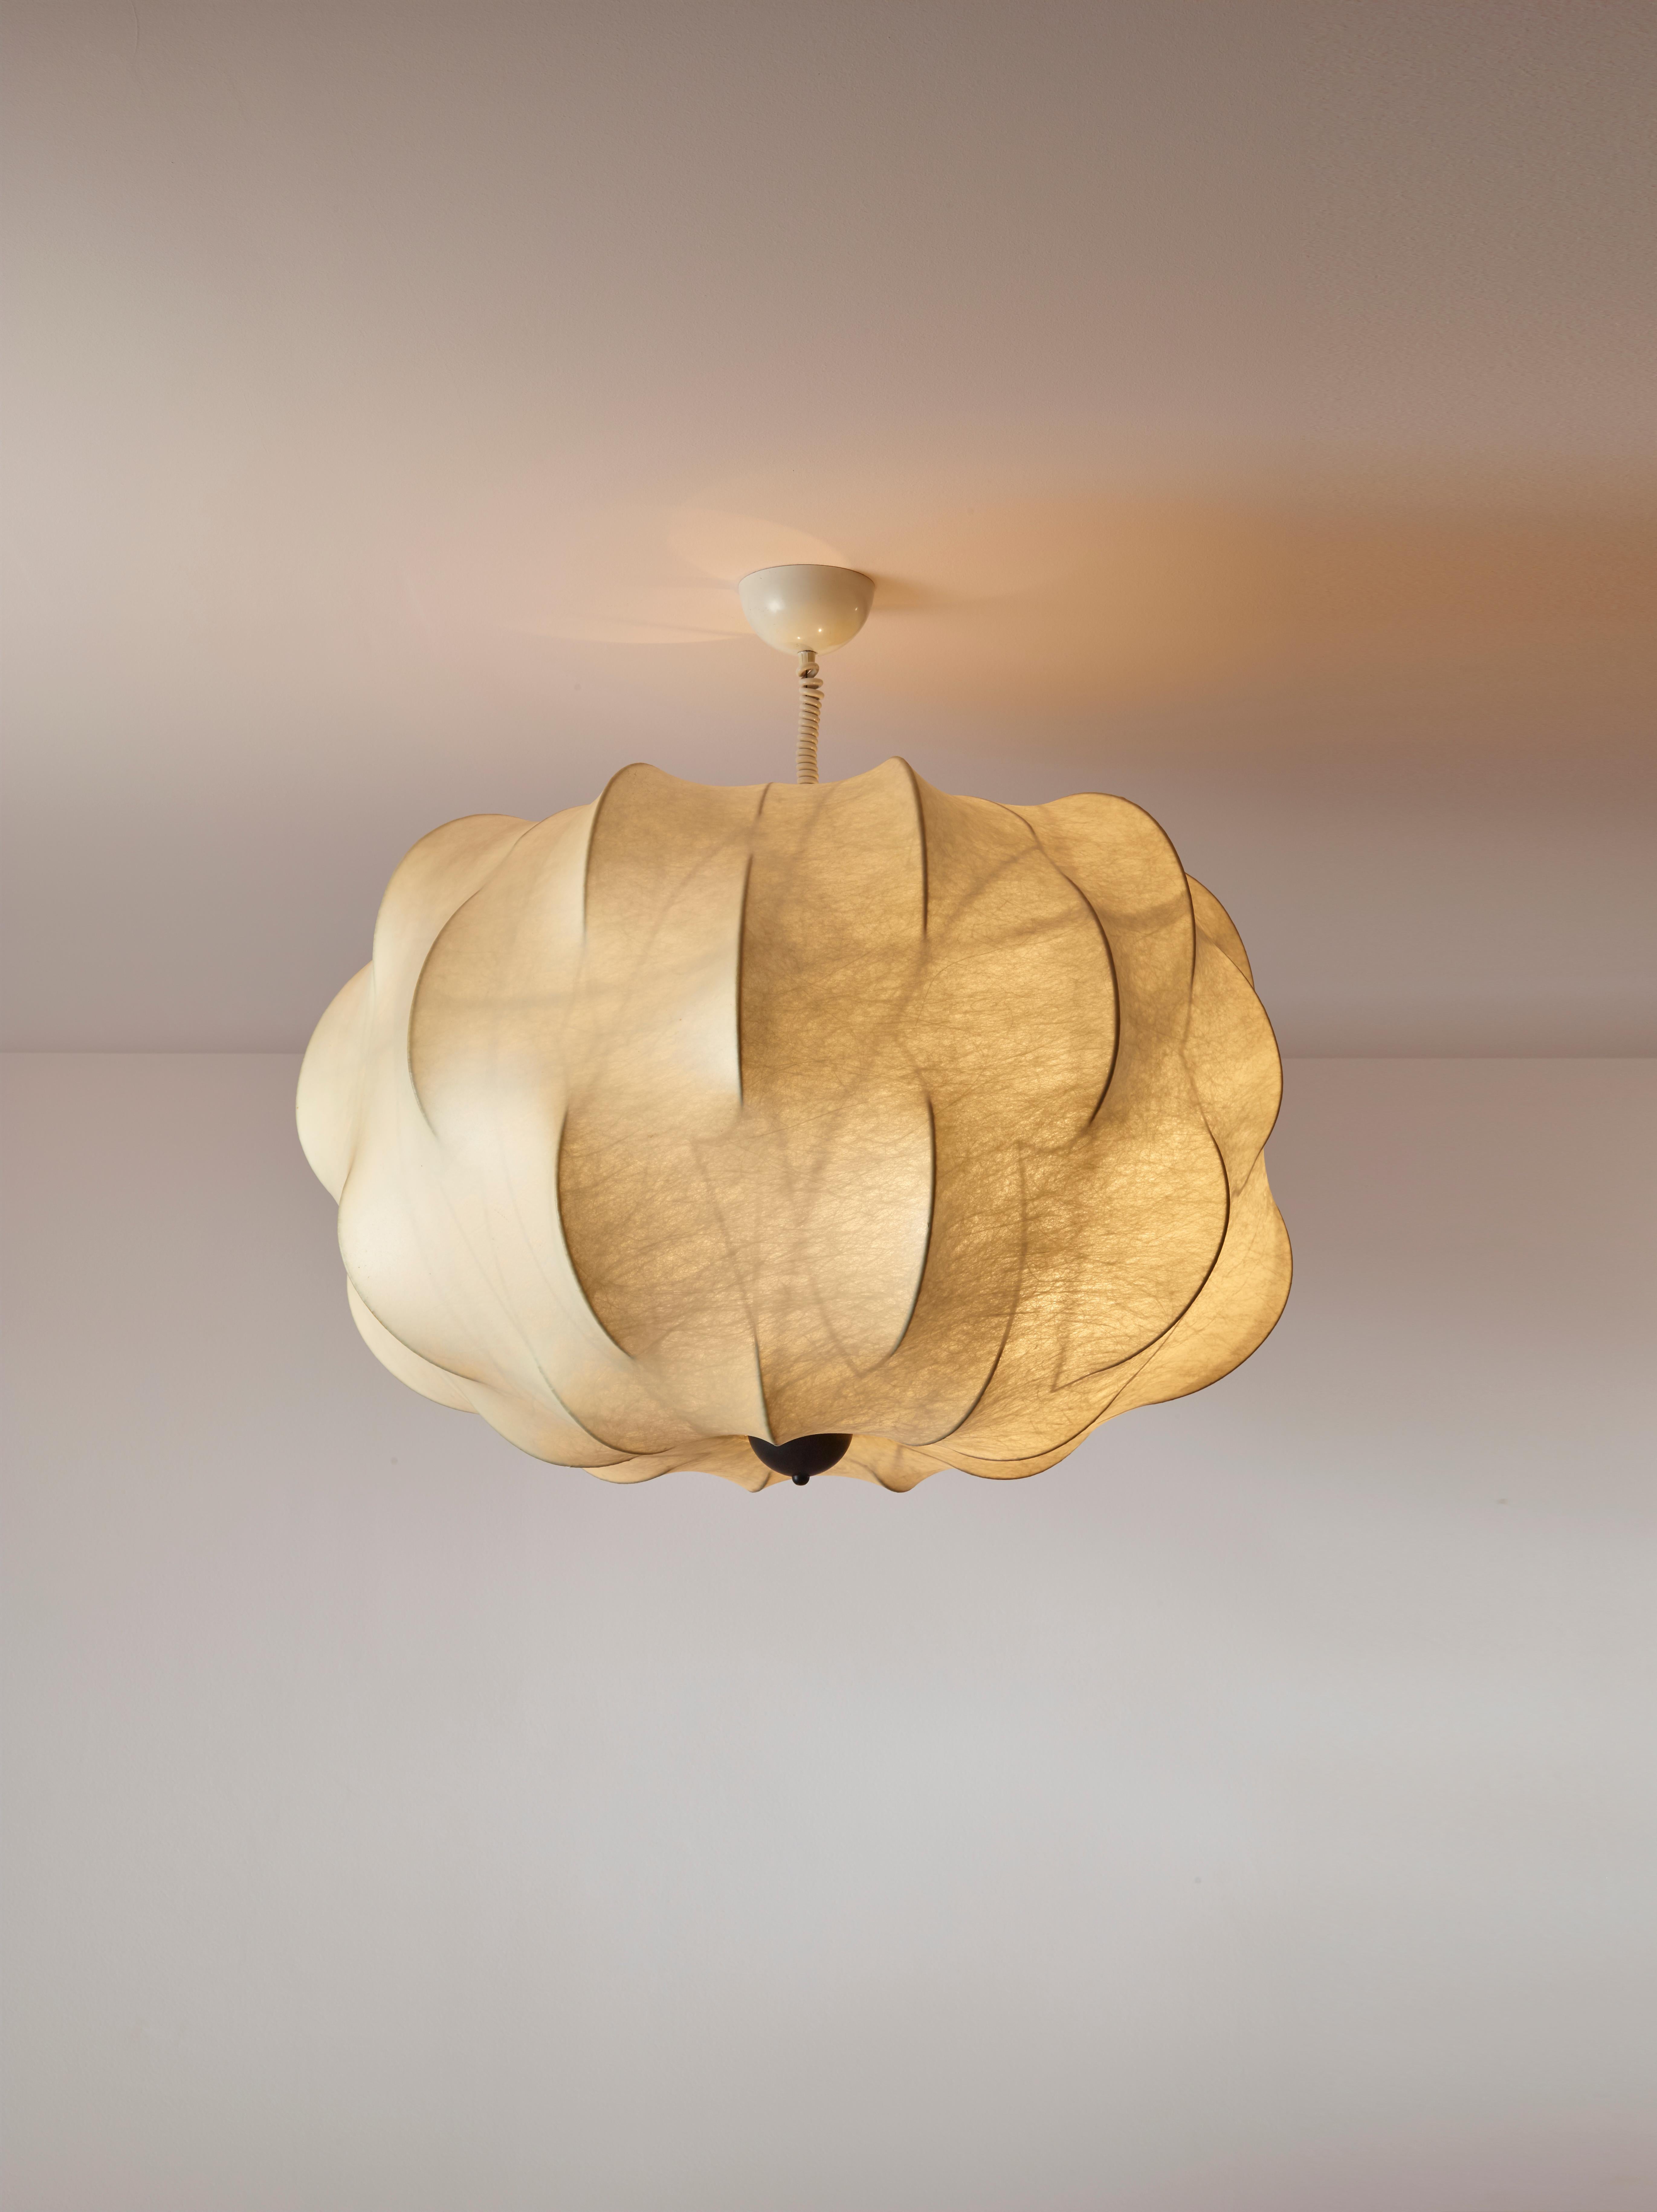 A large cocoon Nuvola chandelier by Tobia Scarpa for Flos designed in the 1962 and crafted in the early 1970s. Perfect vintage condition.

In the realm of mid-century modern design, few pieces encapsulate the era's essence quite like the Nuvola